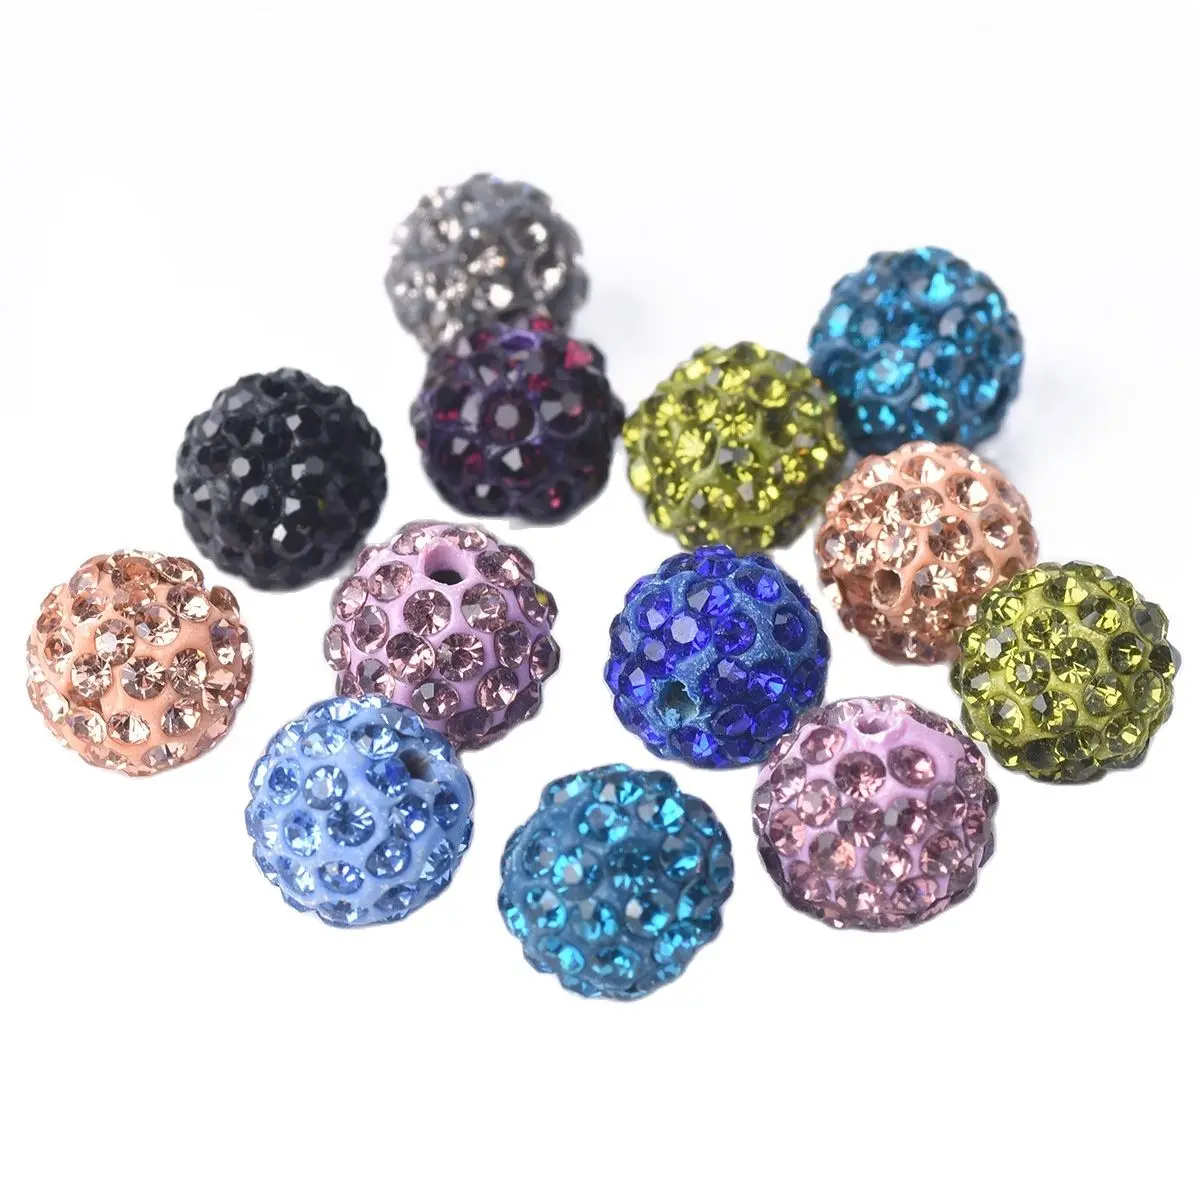 10pcs 10mm Random Mixed Colors Round Crystal Glass Ball & Cray Loose Beads for Jewelry Making DIY Crafts Findings